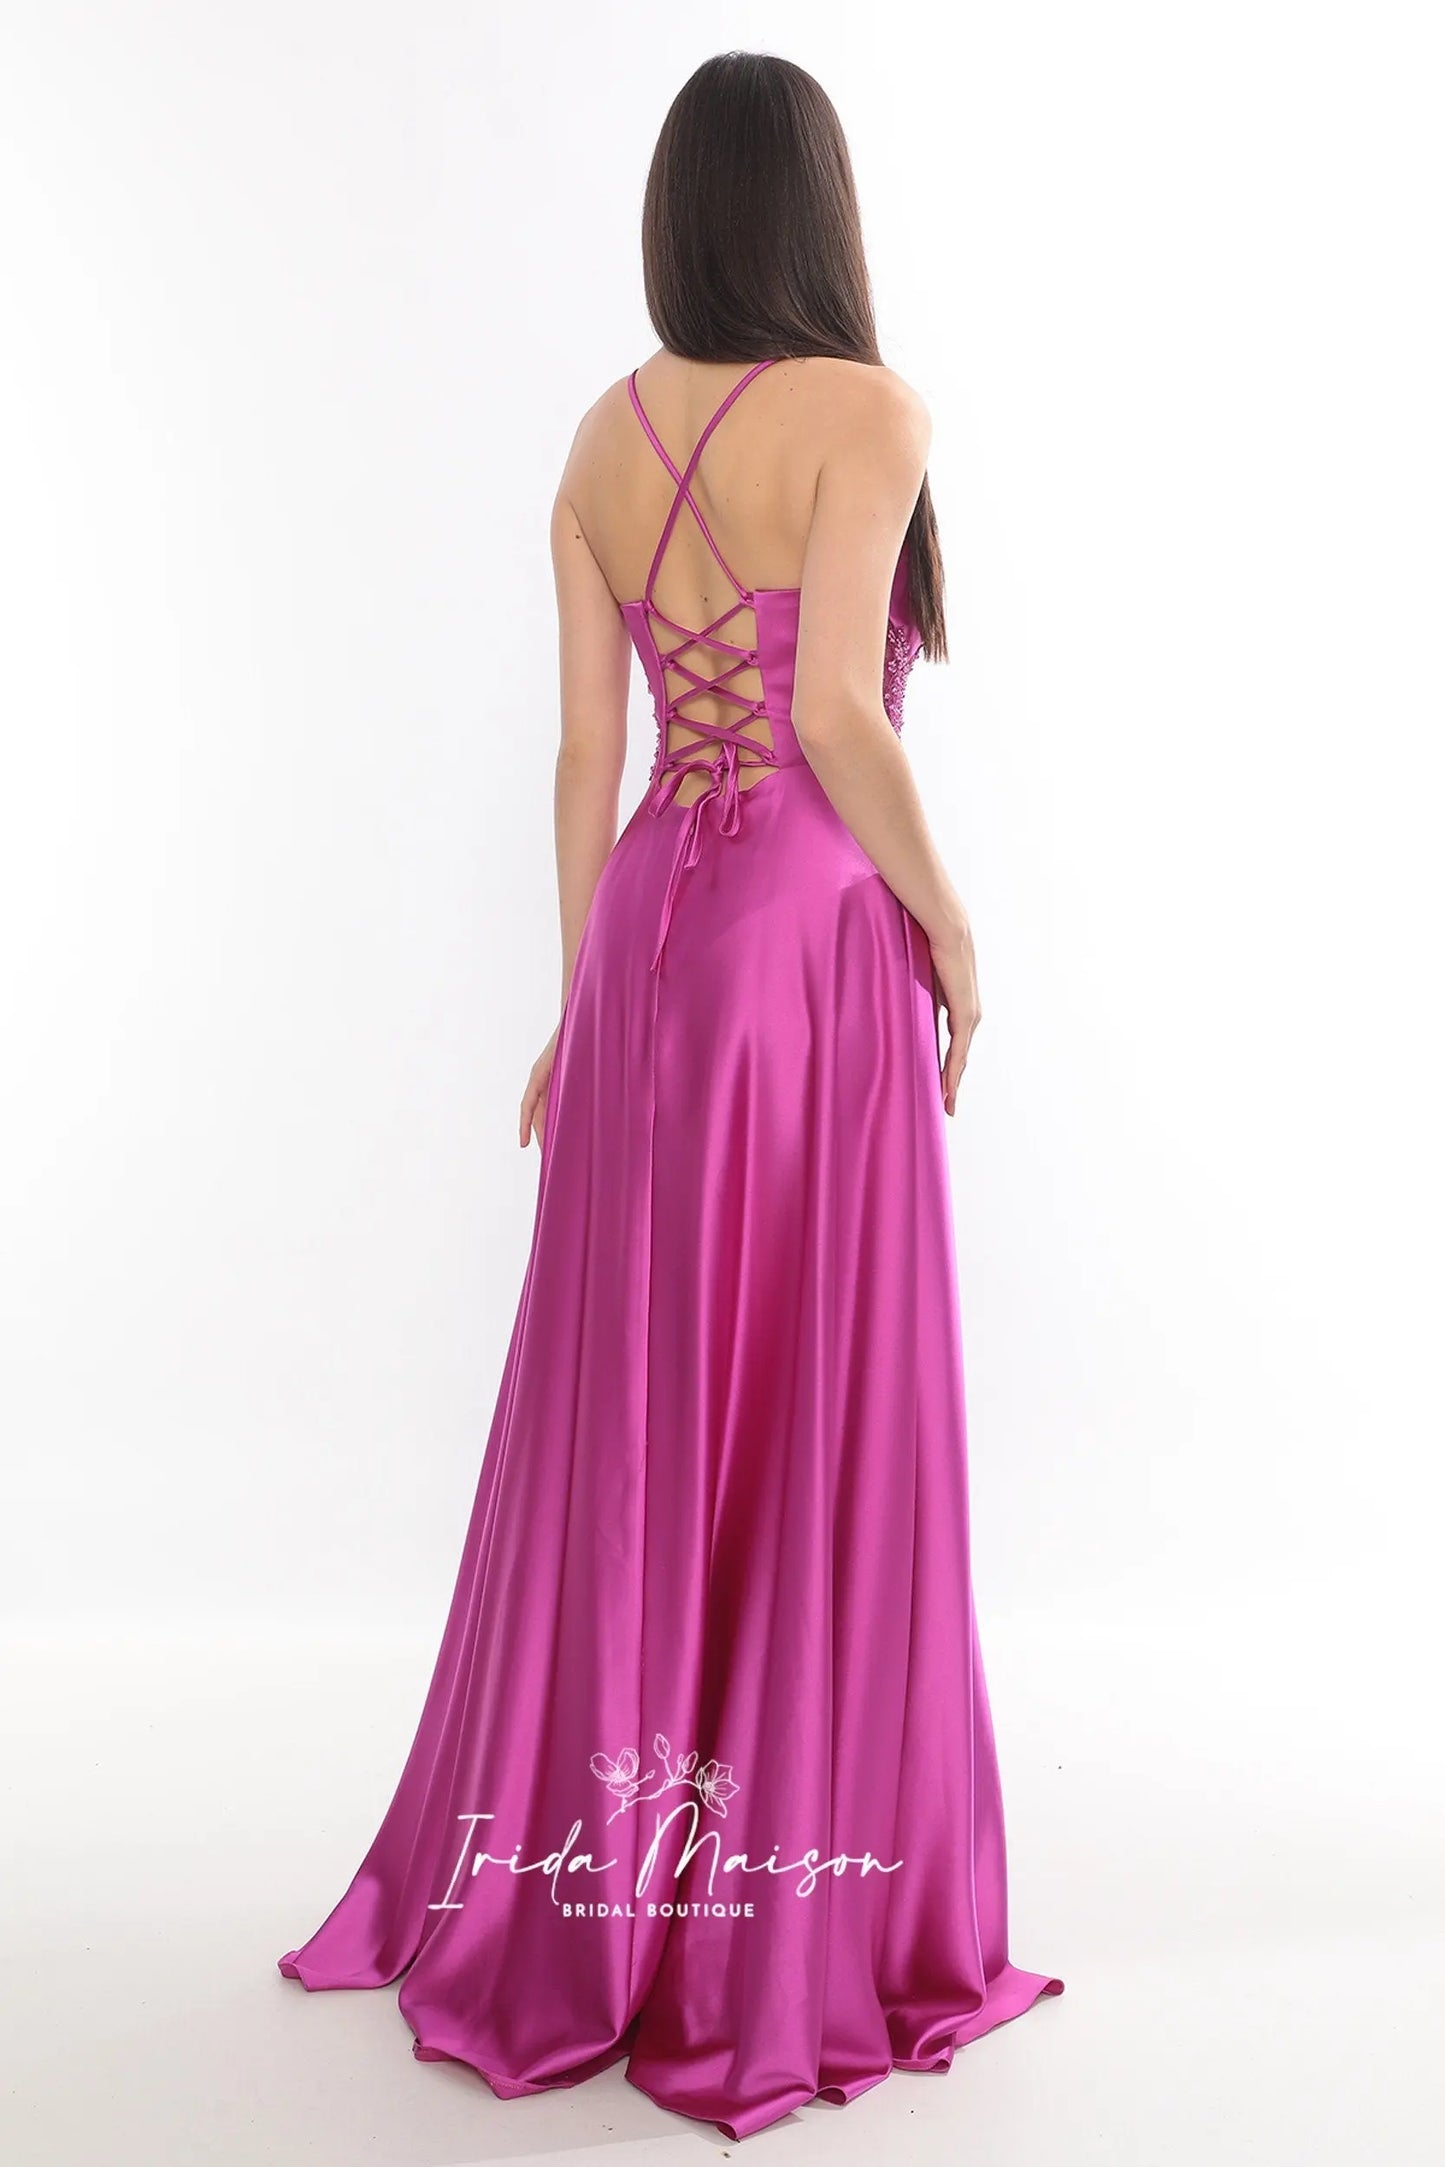 Luxury satin long or mid Prom dress, Cocktail Dress, long Dress, Red Carpet Dress, Party Dress, Special Occasion Dress, Event Dress